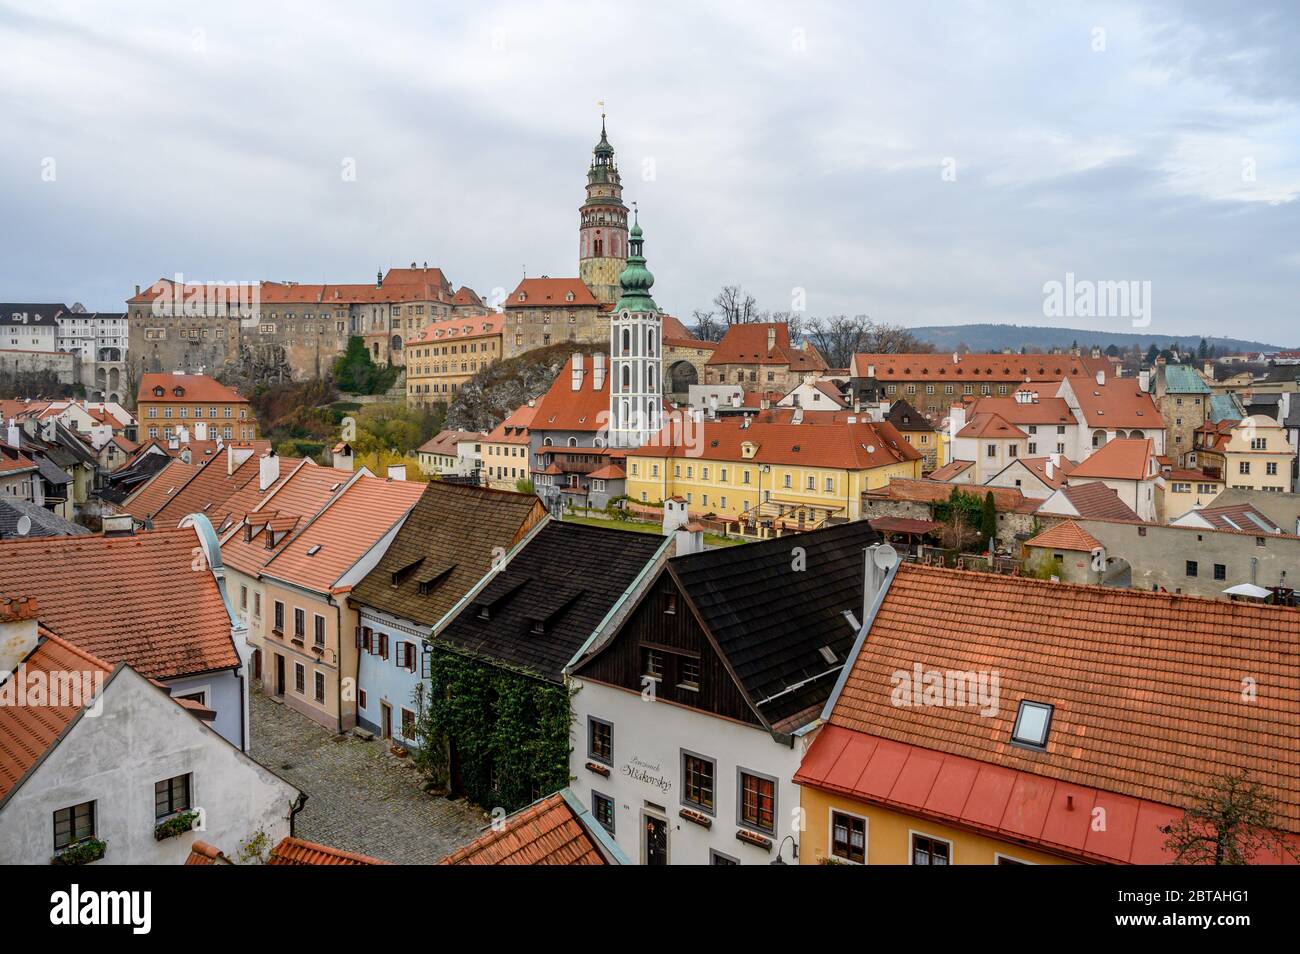 The UNESCO-listed town of Cesky Kromlov in the Southern Bohemia Region of Czech Republic, Europe Stock Photo